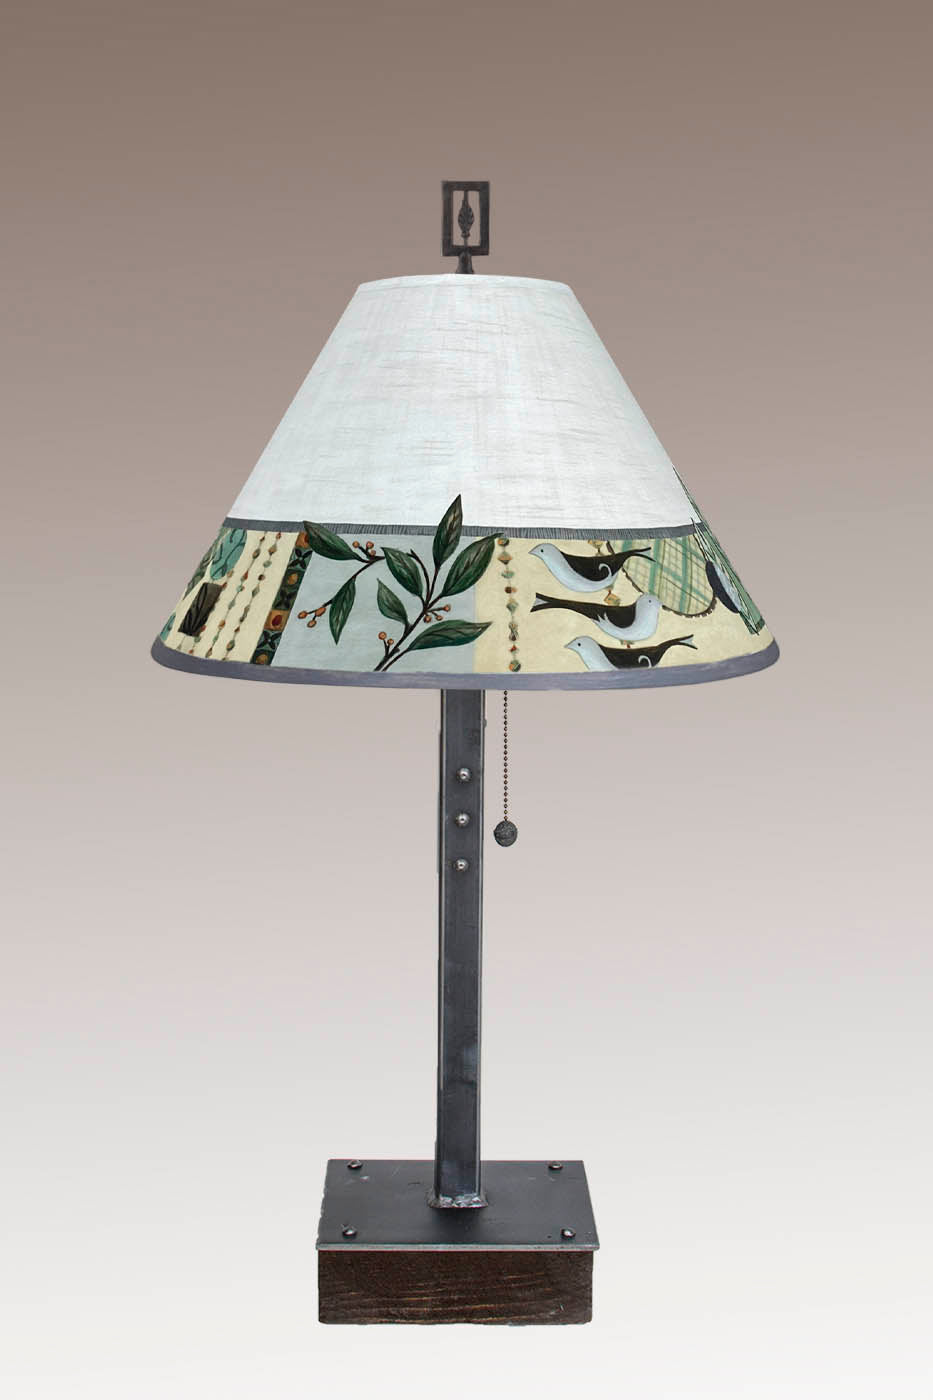 Janna Ugone & Co Table Lamp Steel Table Lamp on Wood with Medium Conical Shade in New Capri Opal